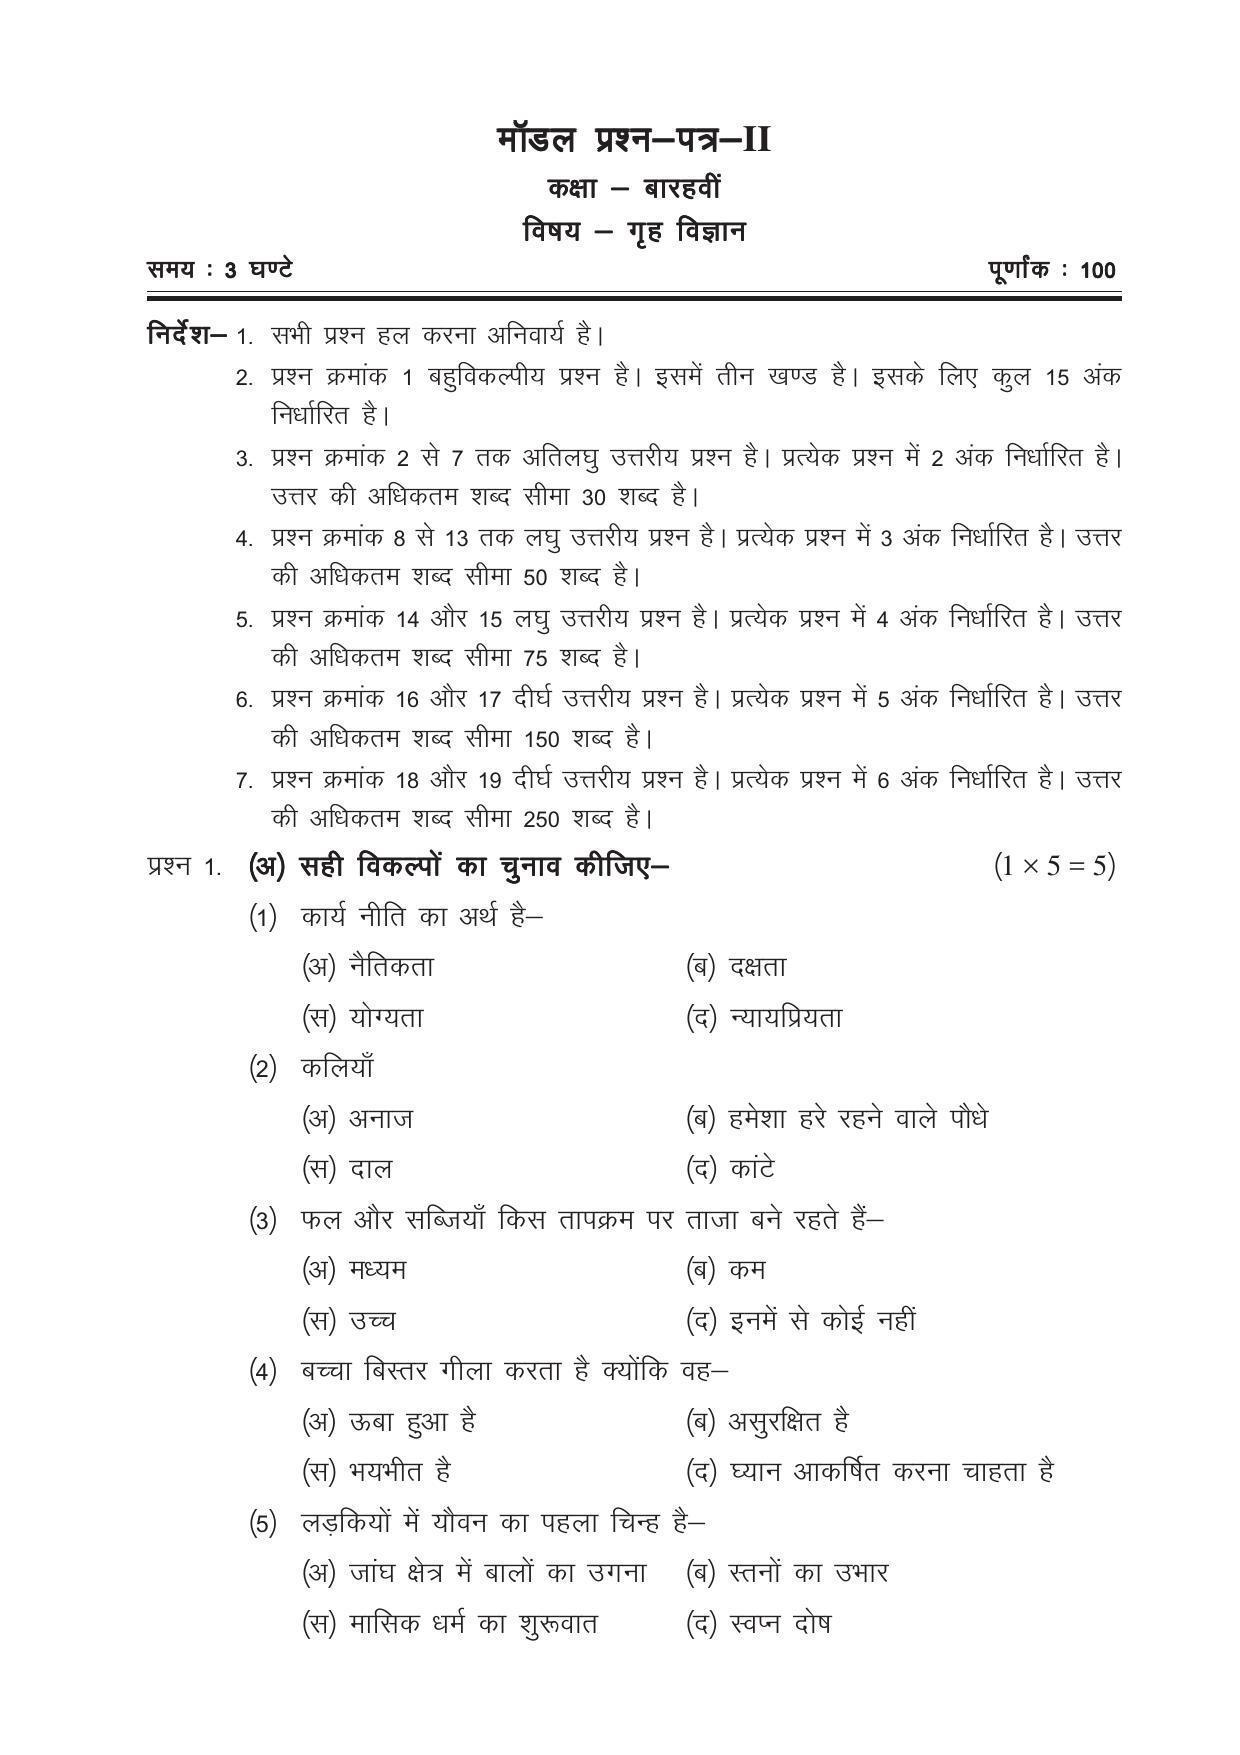 CGSOS Class 12 Model Question Paper - Home Science - II - Page 1